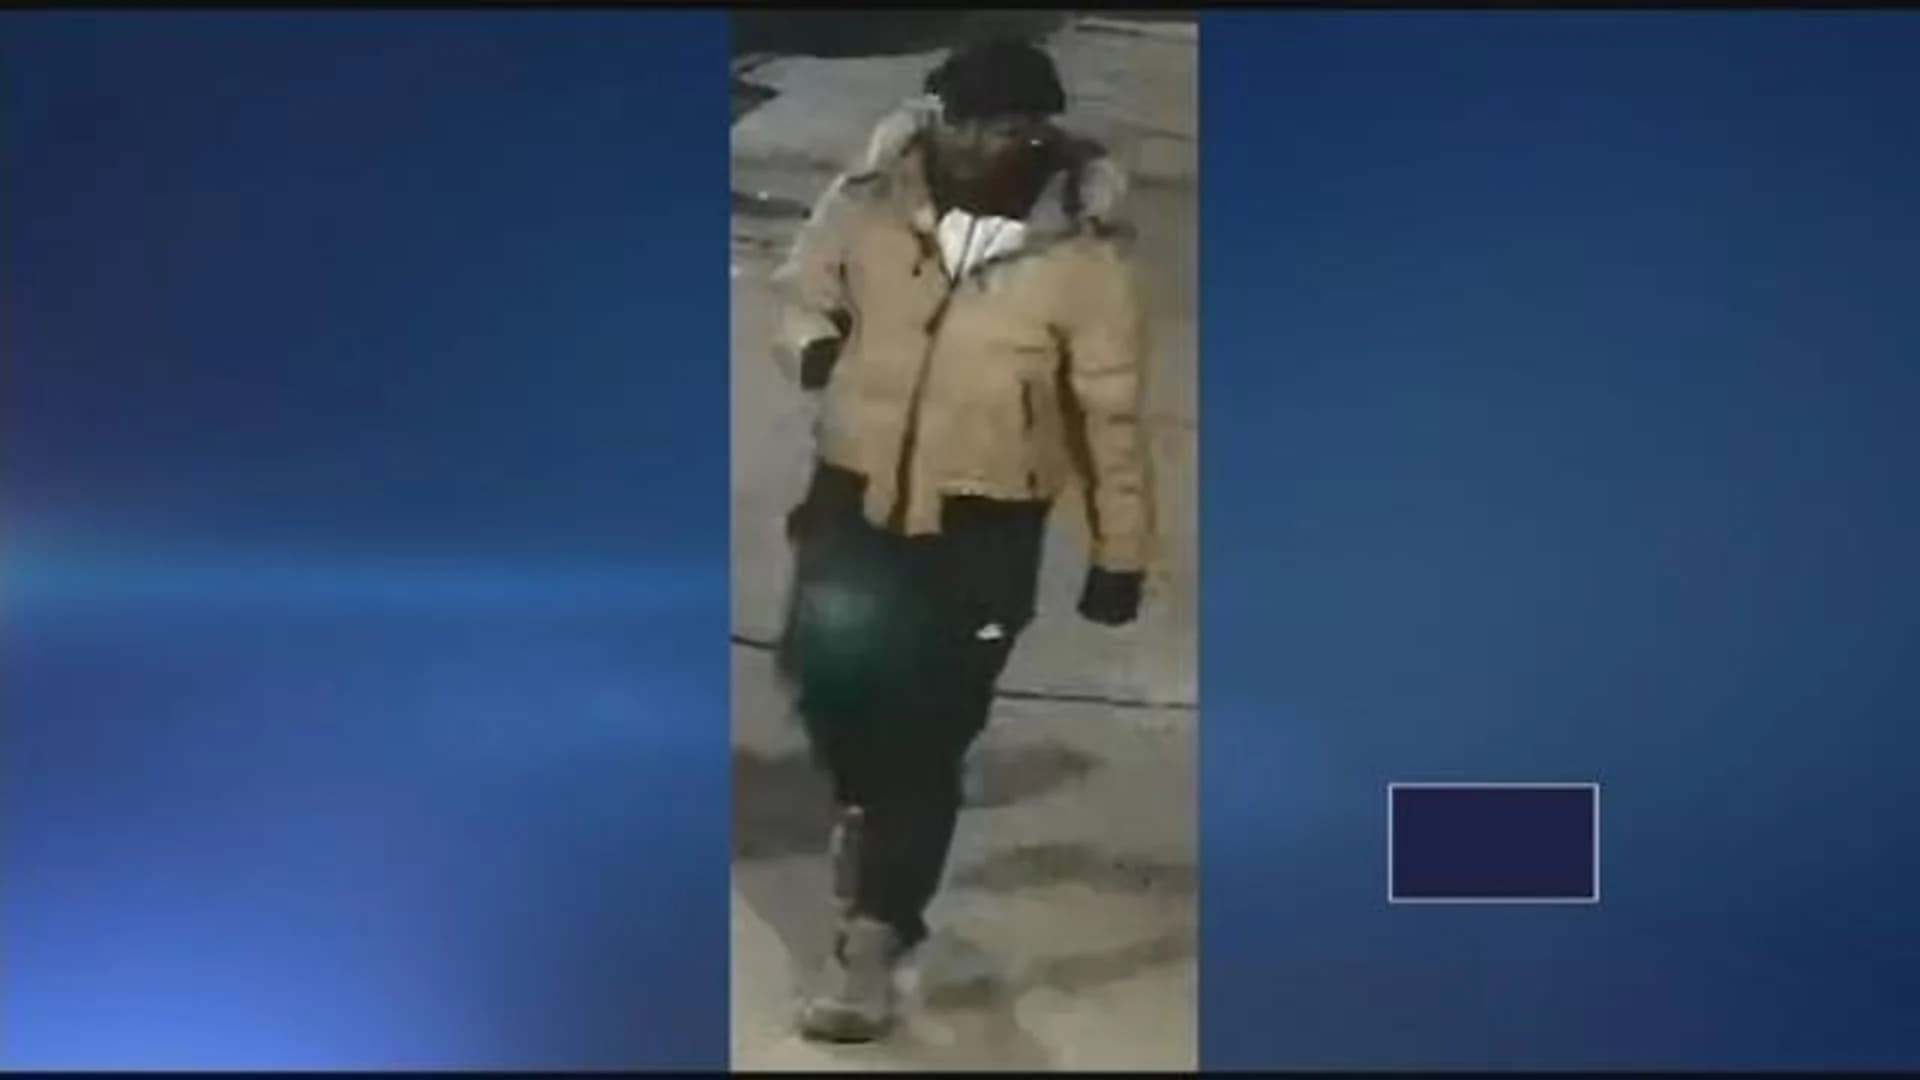 Police: 6 men wanted in connection to cellphone robbery